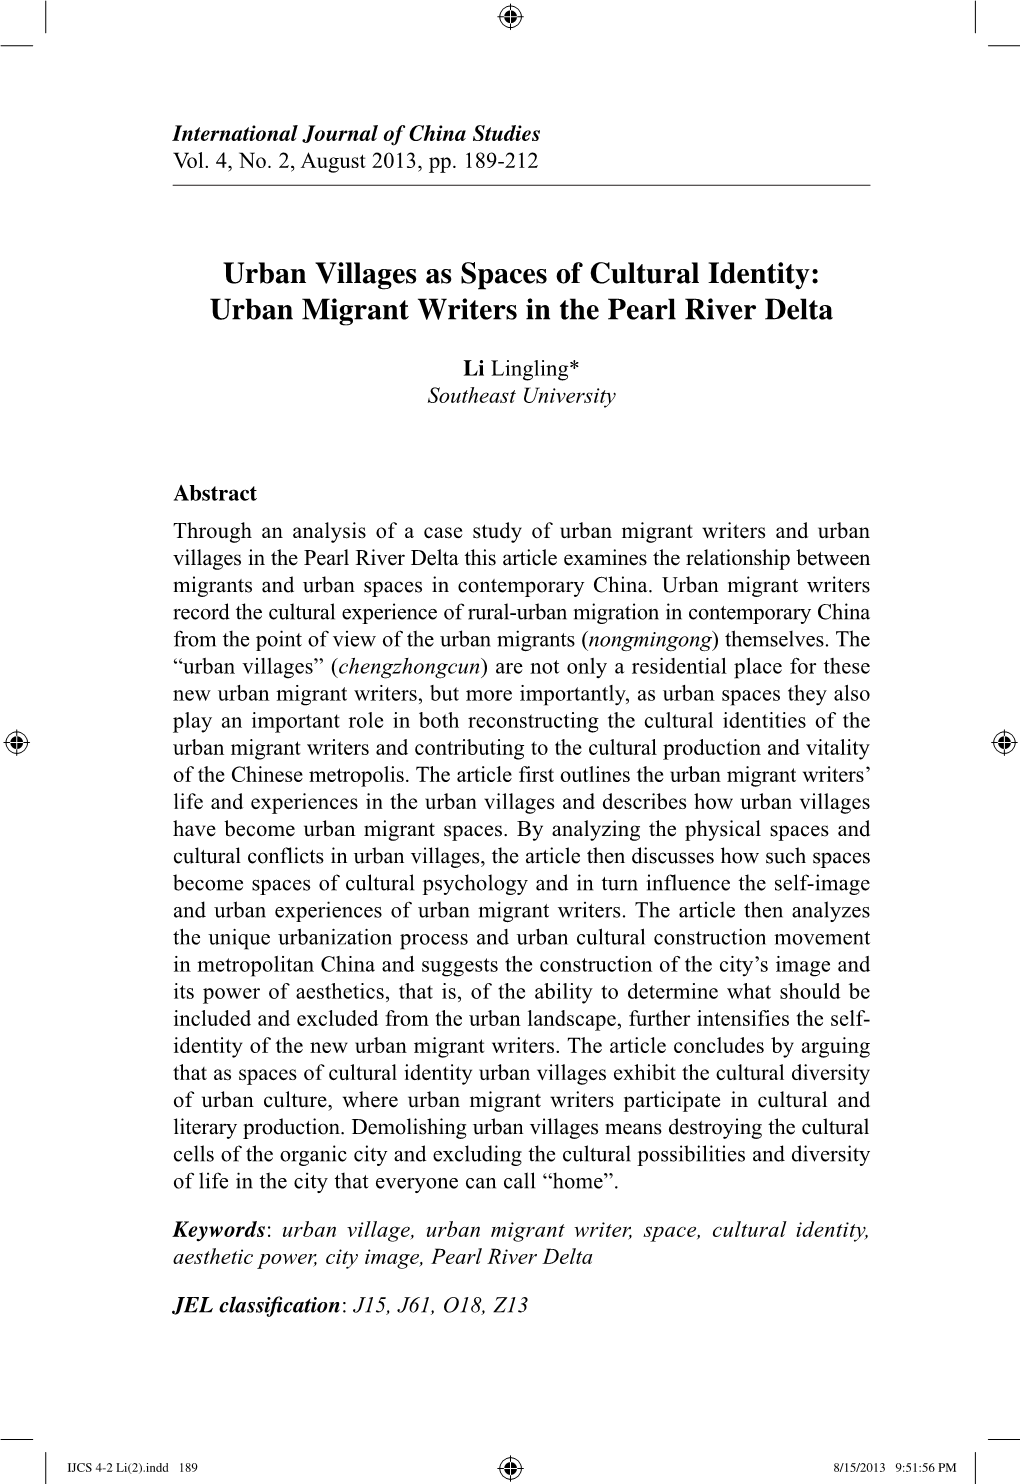 Urban Villages As Spaces of Cultural Identity: Urban Migrant Writers in the Pearl River Delta